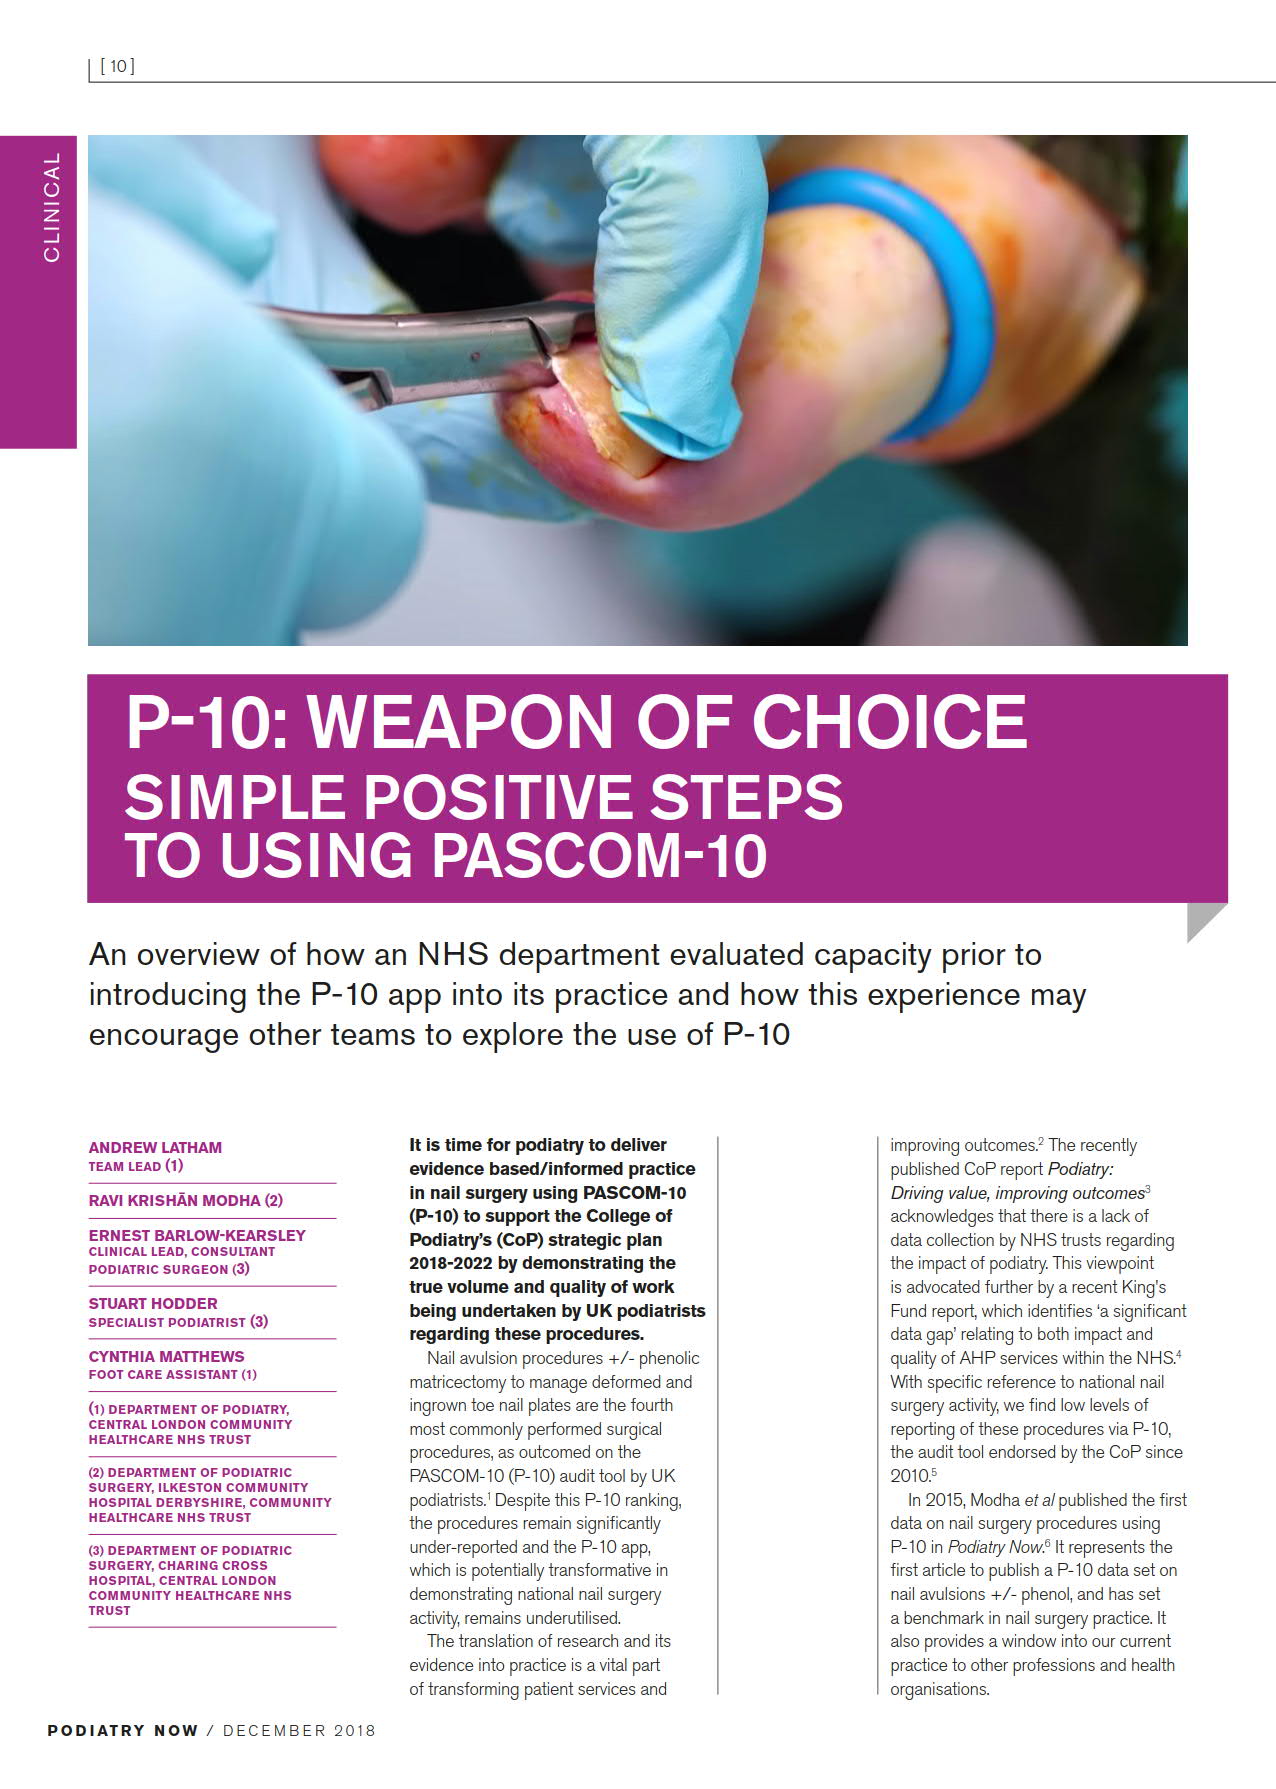 P-10 Weapon of Choice pg1